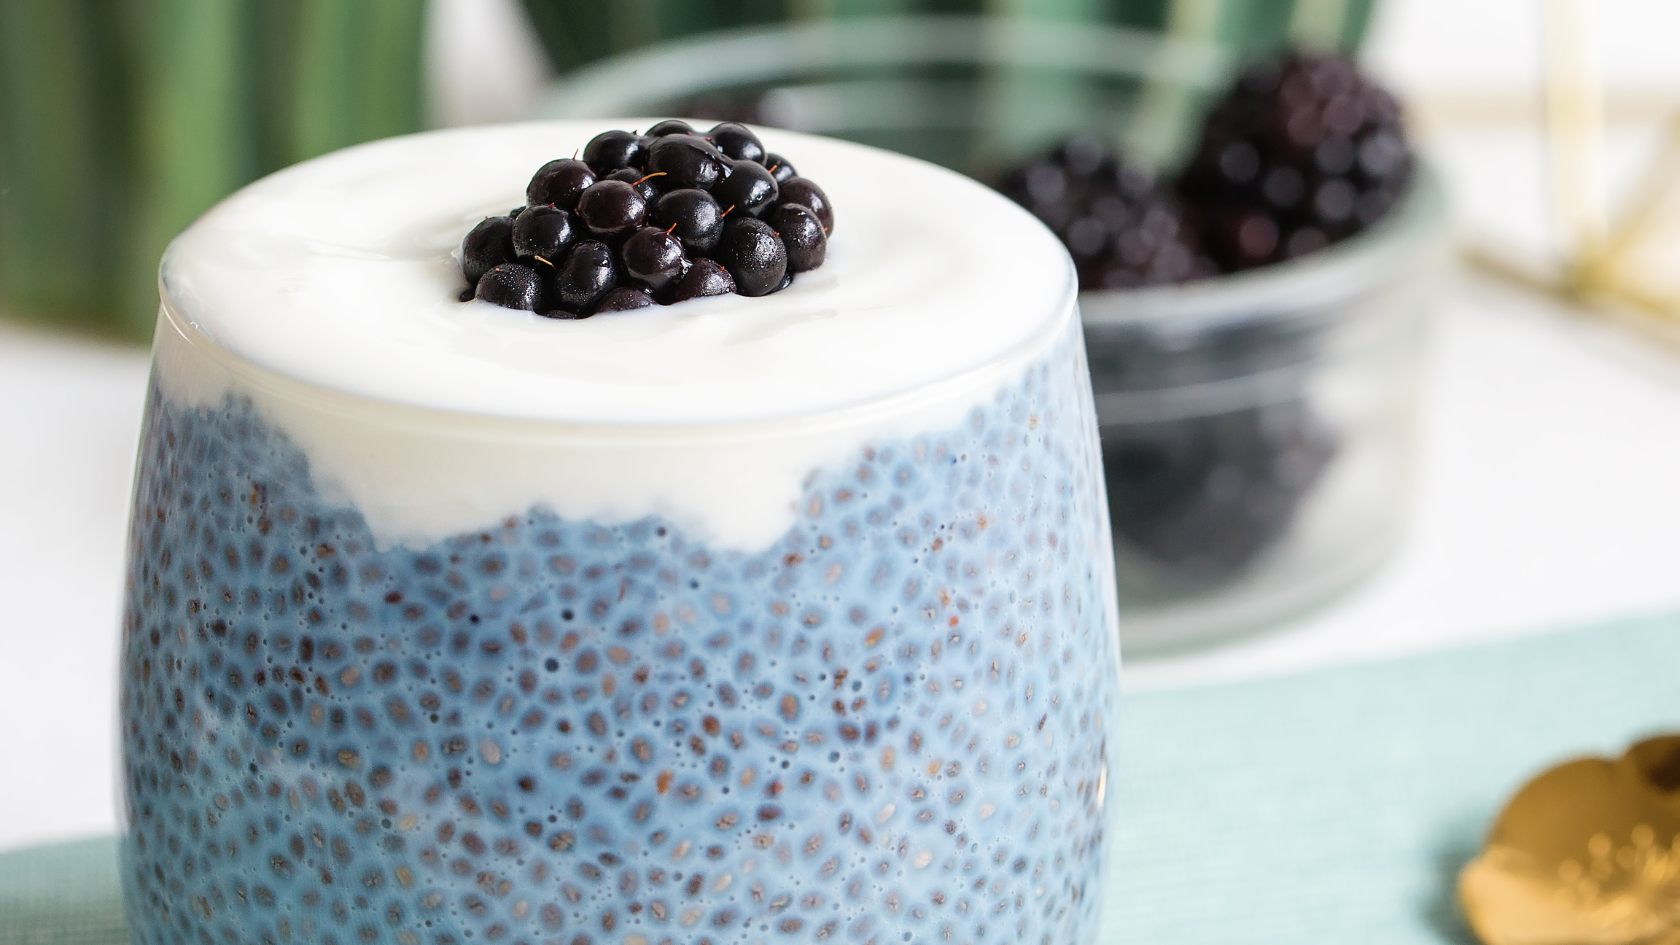 5 Simple Ways To Use Chia Seeds For Weight Loss